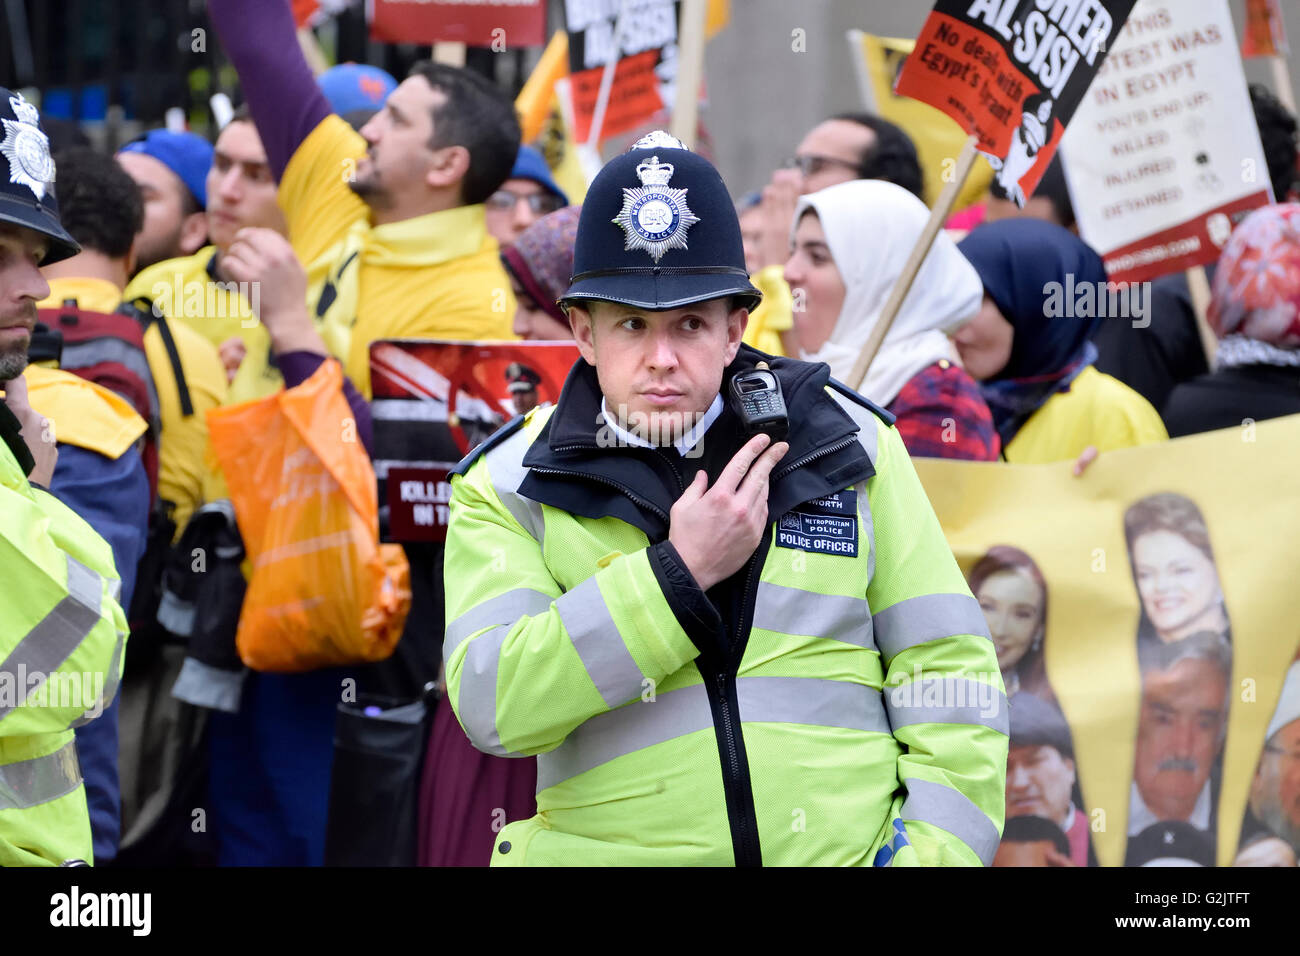 London, Nov 5th. Police officer and demonstrators for and against President Sisi of Egypt protest in Whitehall awaiting.... Stock Photo